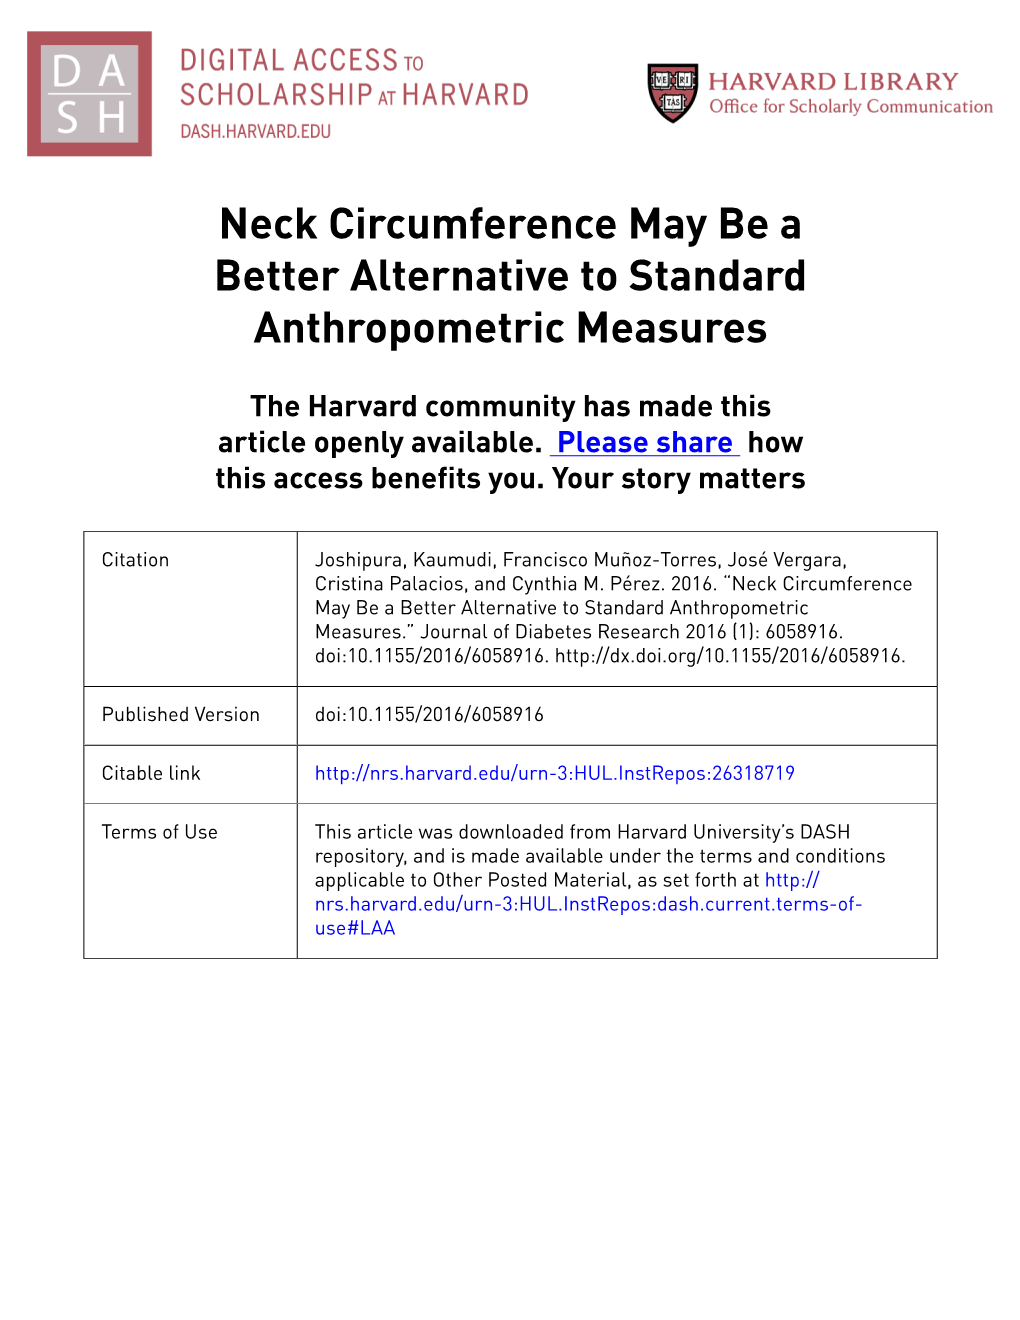 Neck Circumference May Be a Better Alternative to Standard Anthropometric Measures